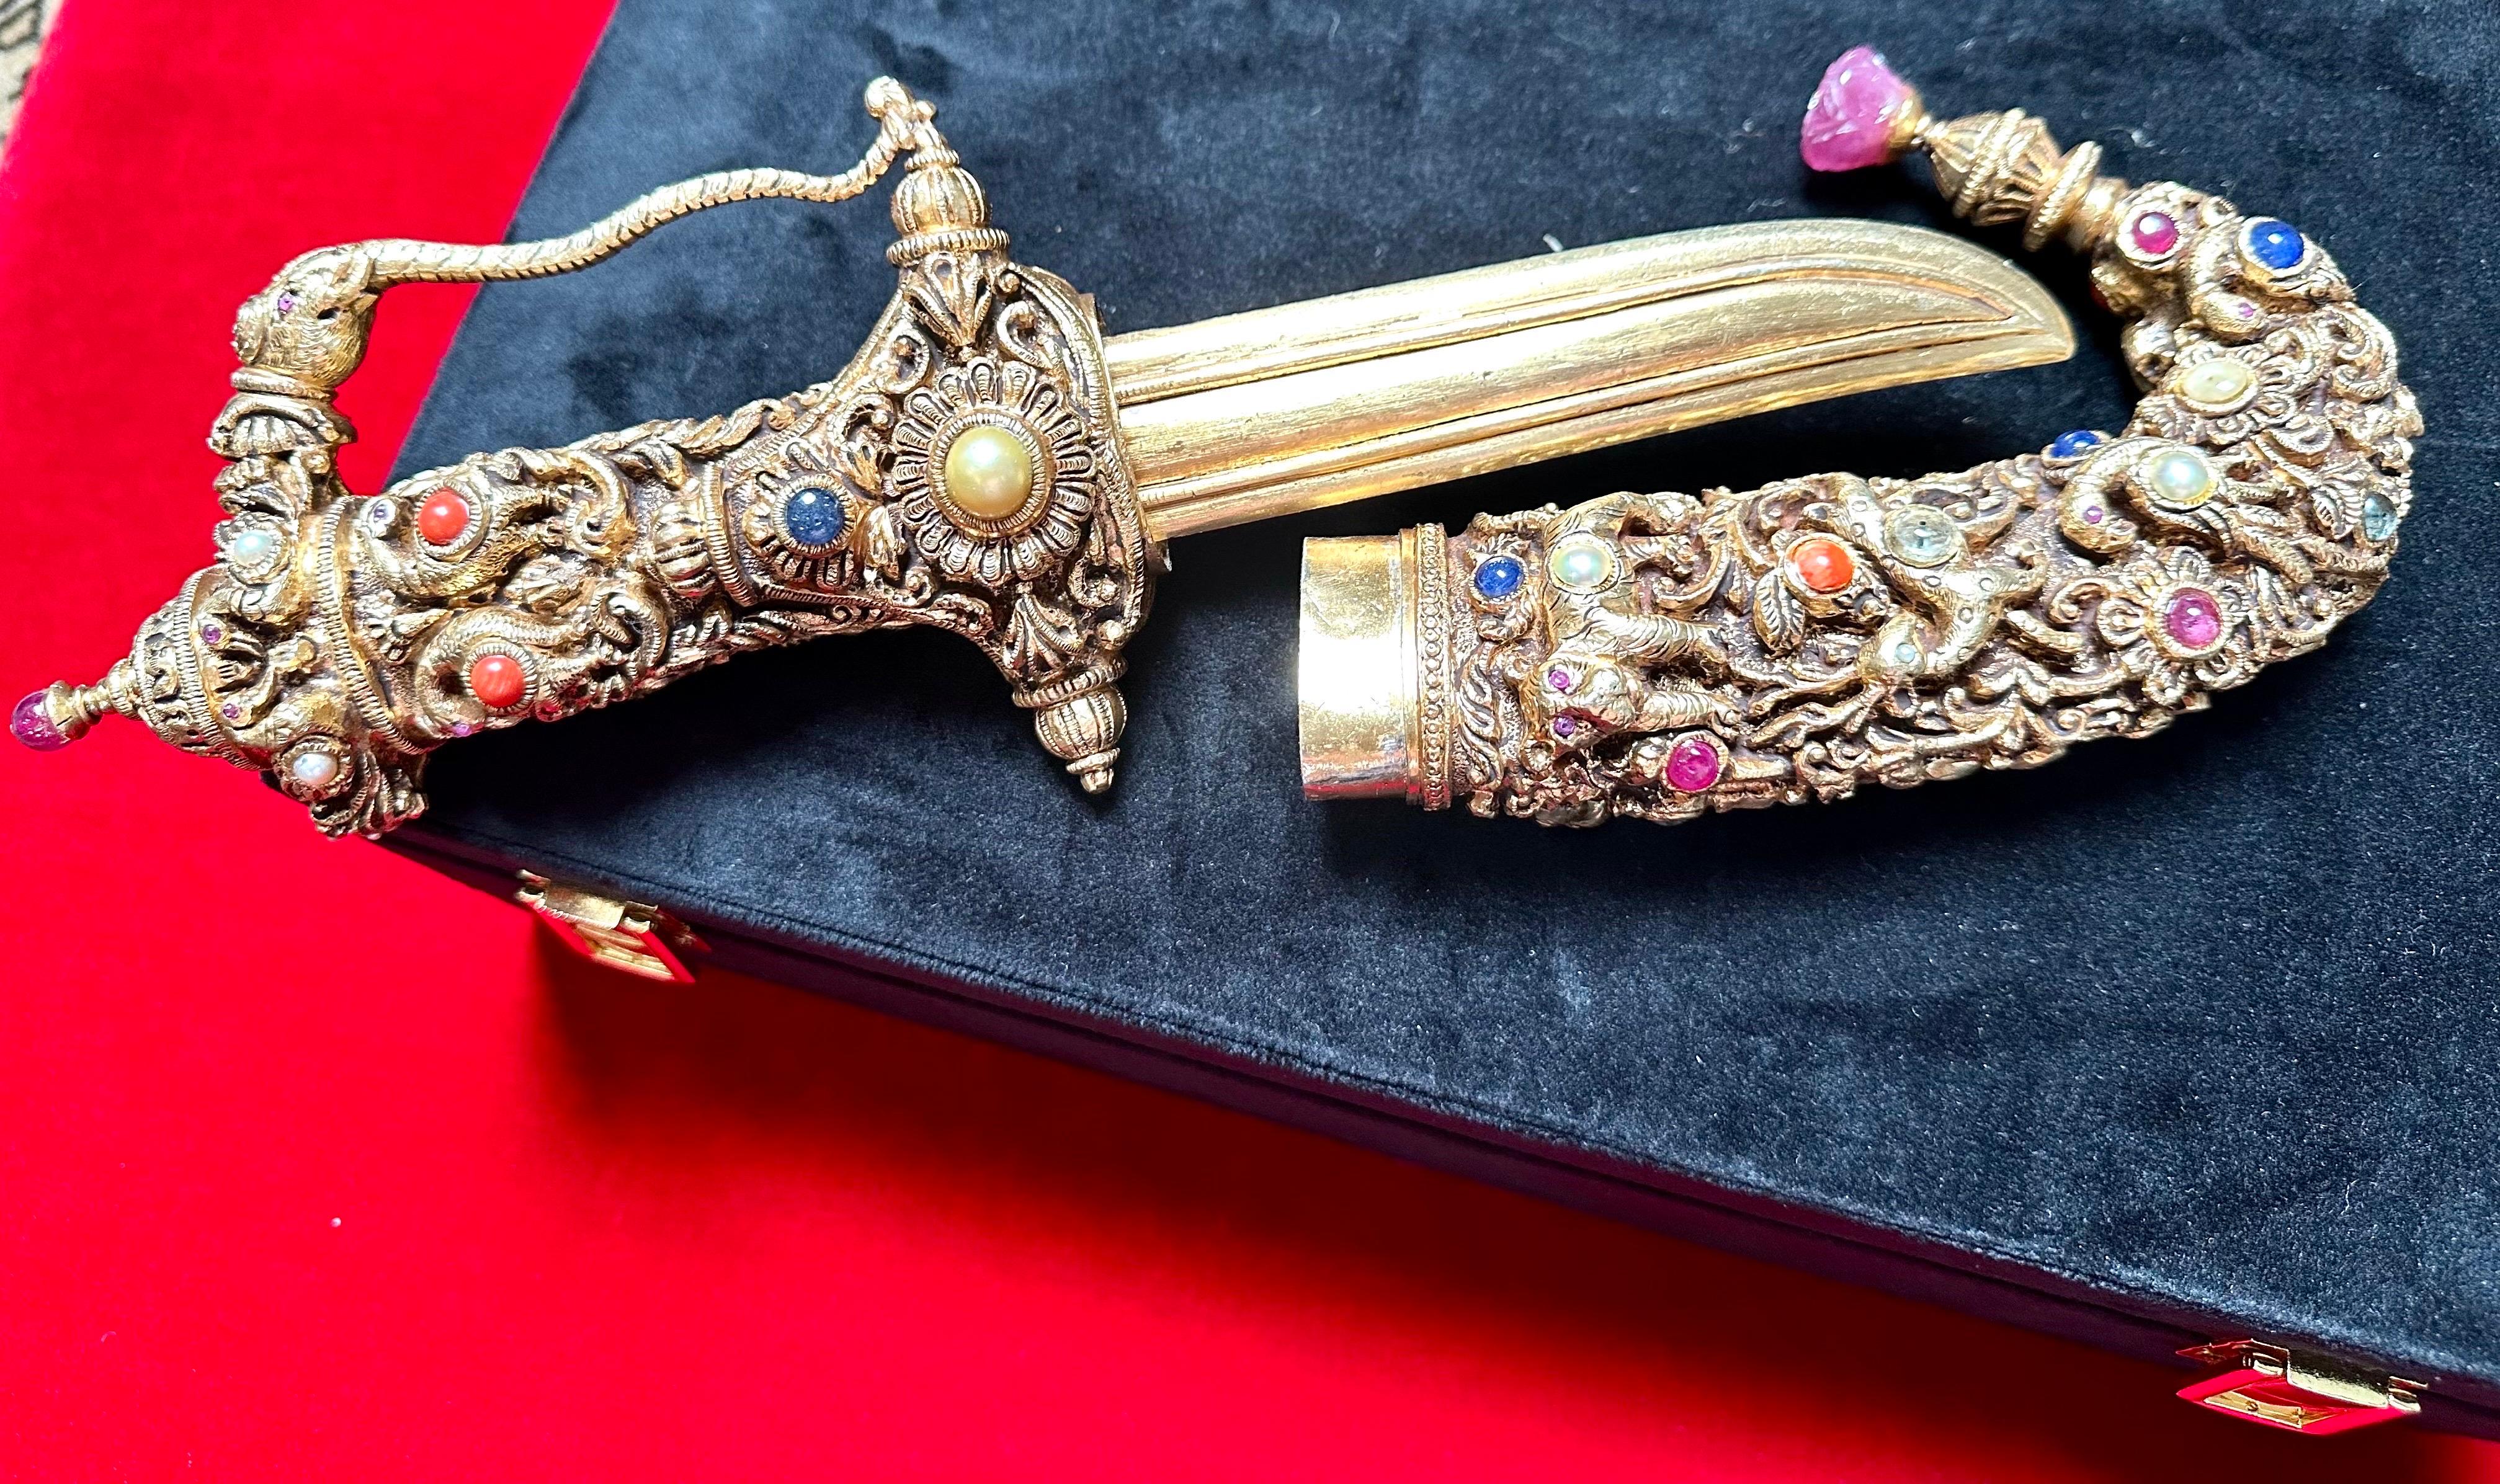 Introducing the captivating Silver-Gilt & Jewel Mounted Dagger, a true masterpiece of craftsmanship. This Mughal-inspired dagger knife, made from 1.1 kg of silver, serves as an exquisite collectible to adorn your living room. Its regal design